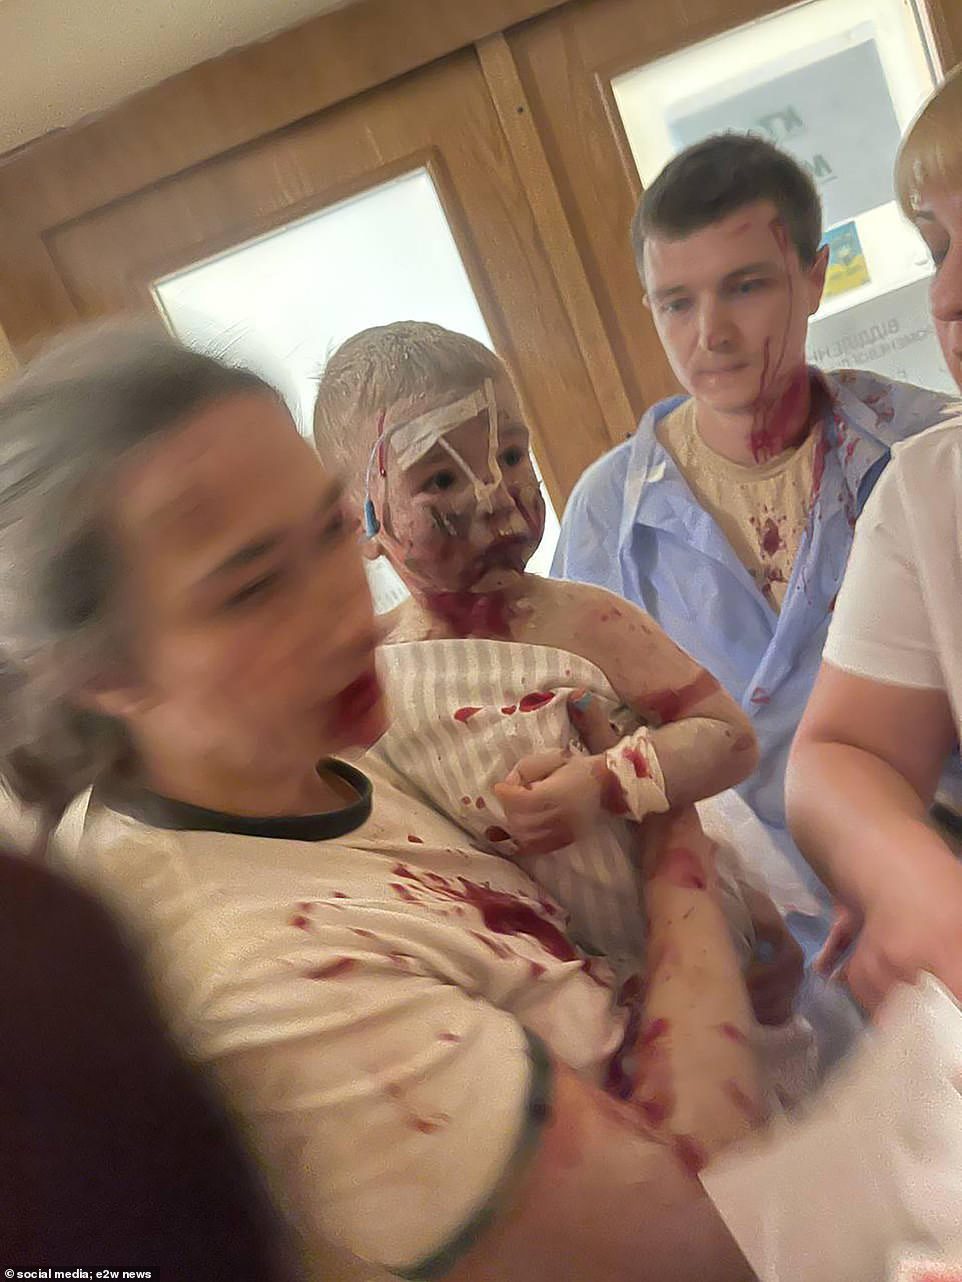 Russian missiles have struck a children's hospital in Kyiv and killed at least three people elsewhere in the Ukrainian capital, authorities have said. In shocking footage, a woman is seen carrying a young child, along side a medical worker. All three are covered in blood